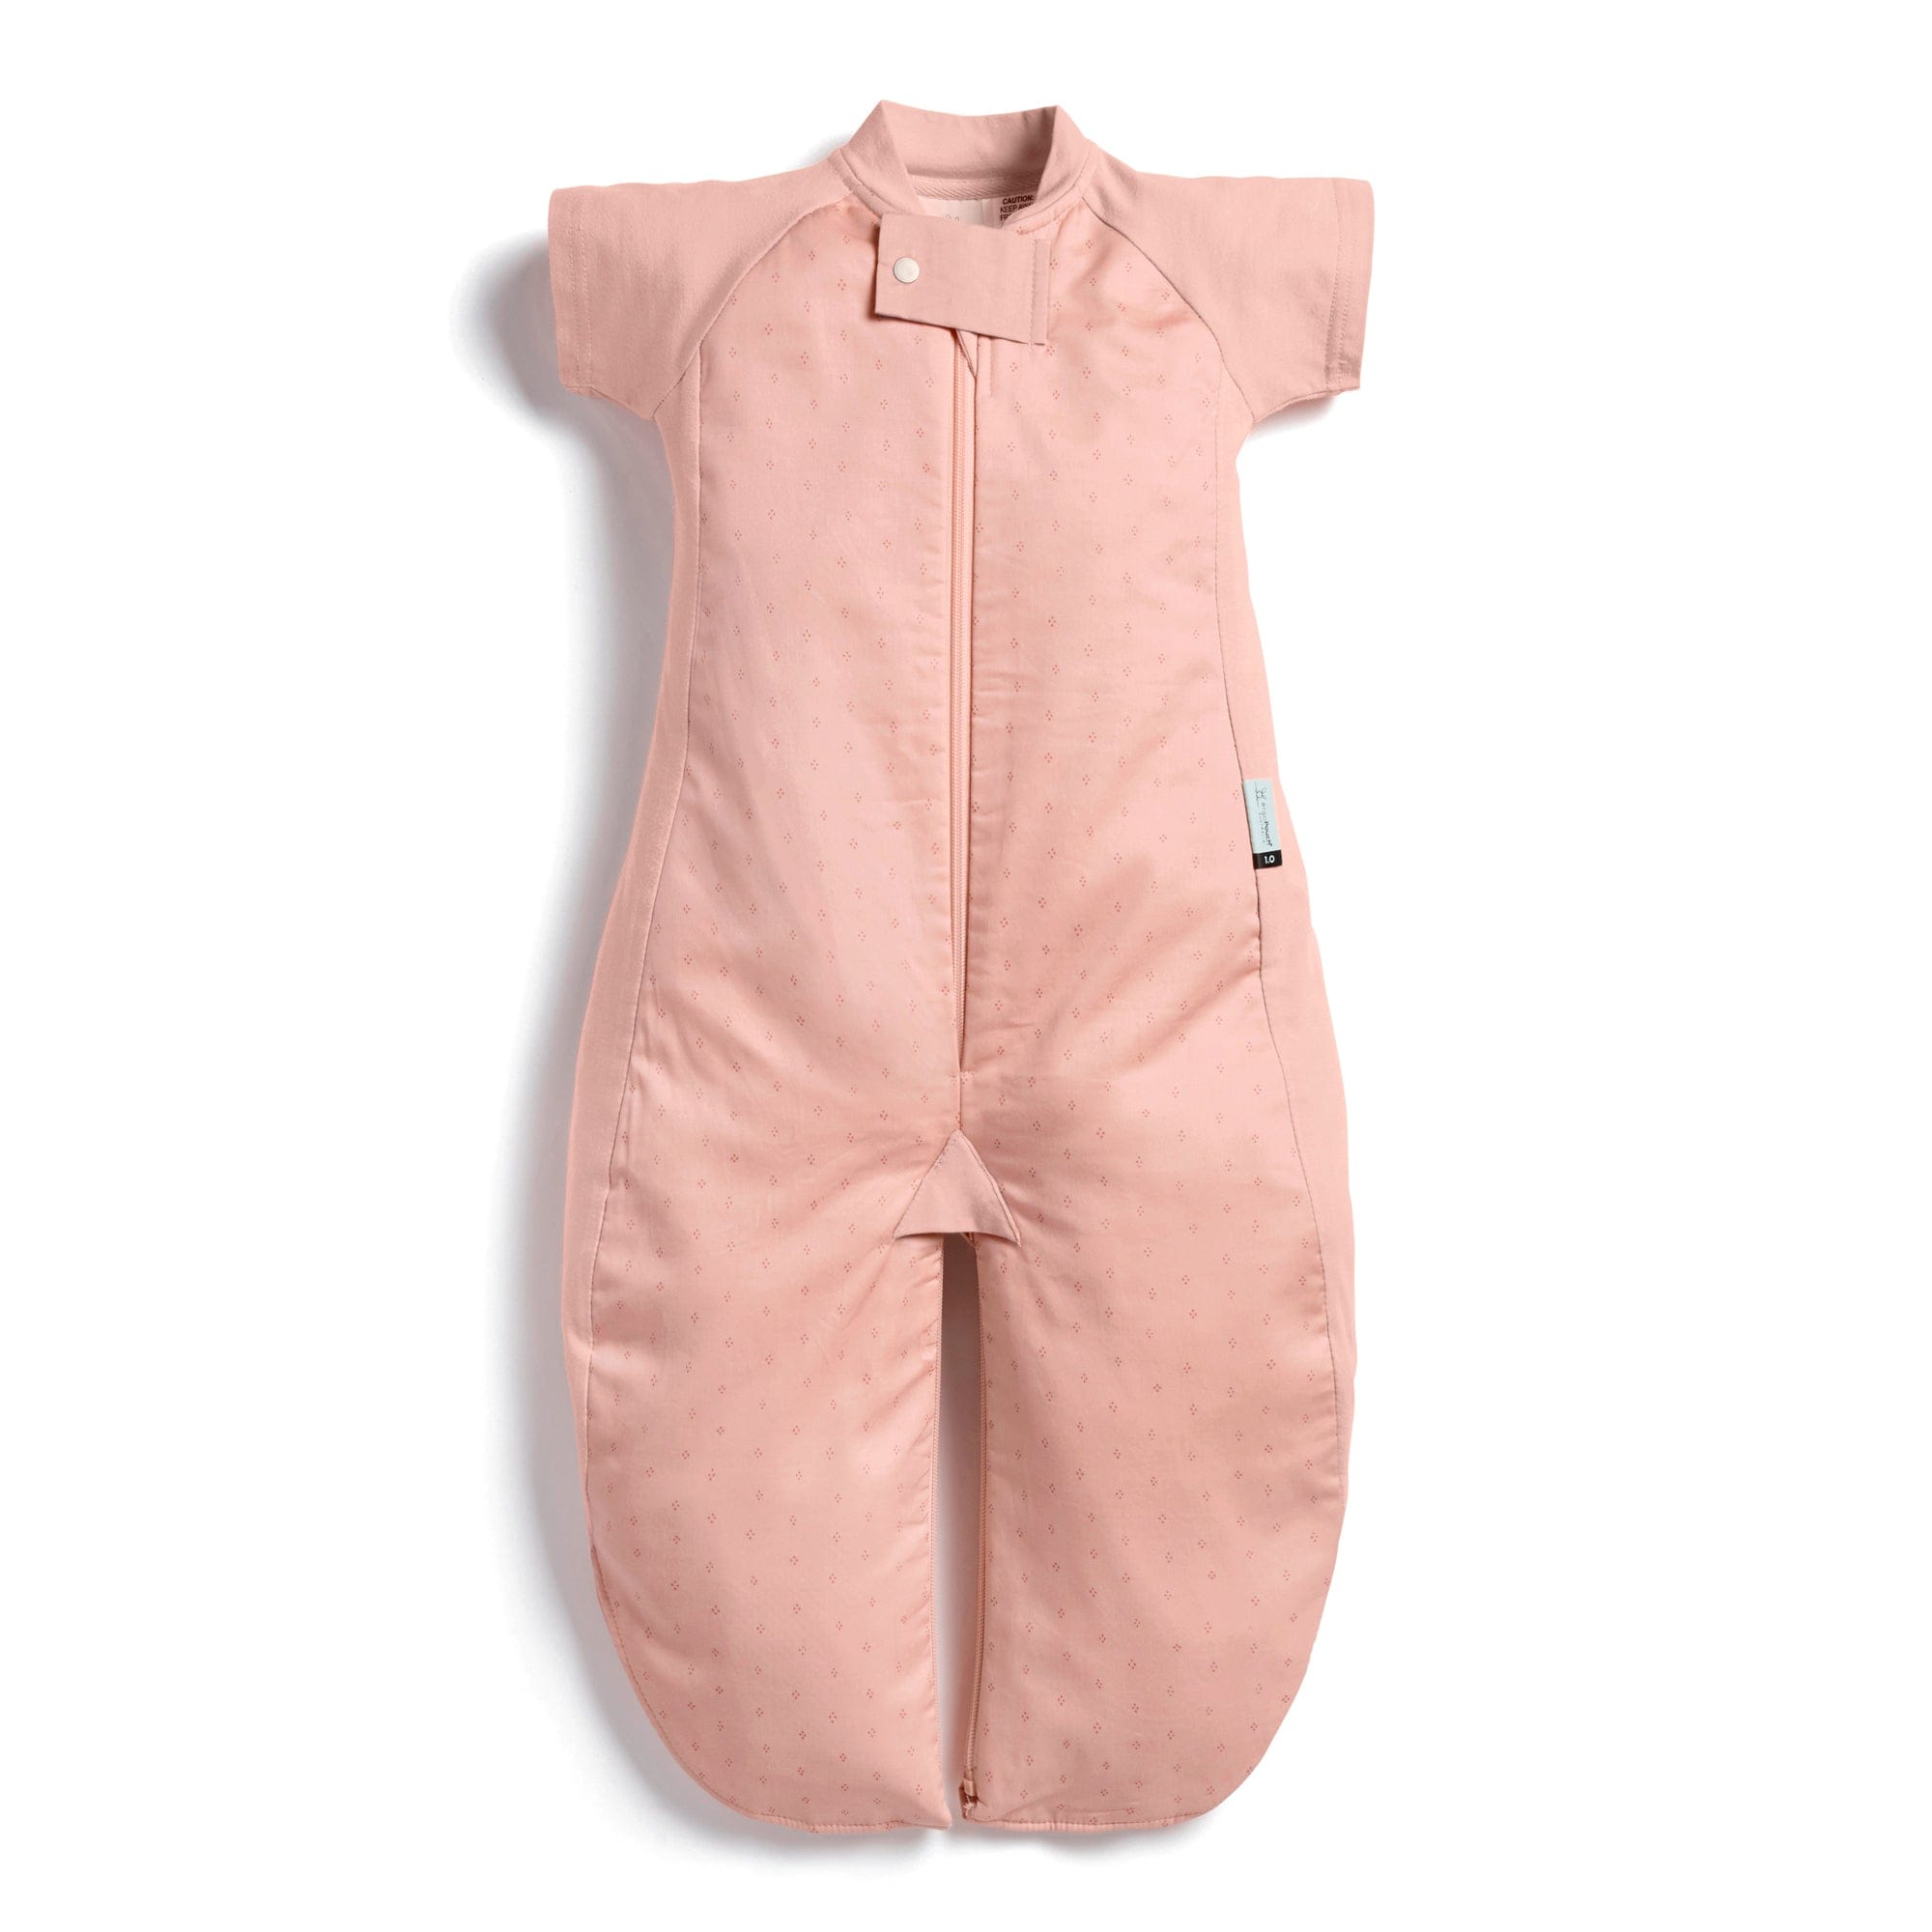 Sleep Suit Bag 1.0 Tog For Kids By ergoPouch - Berries